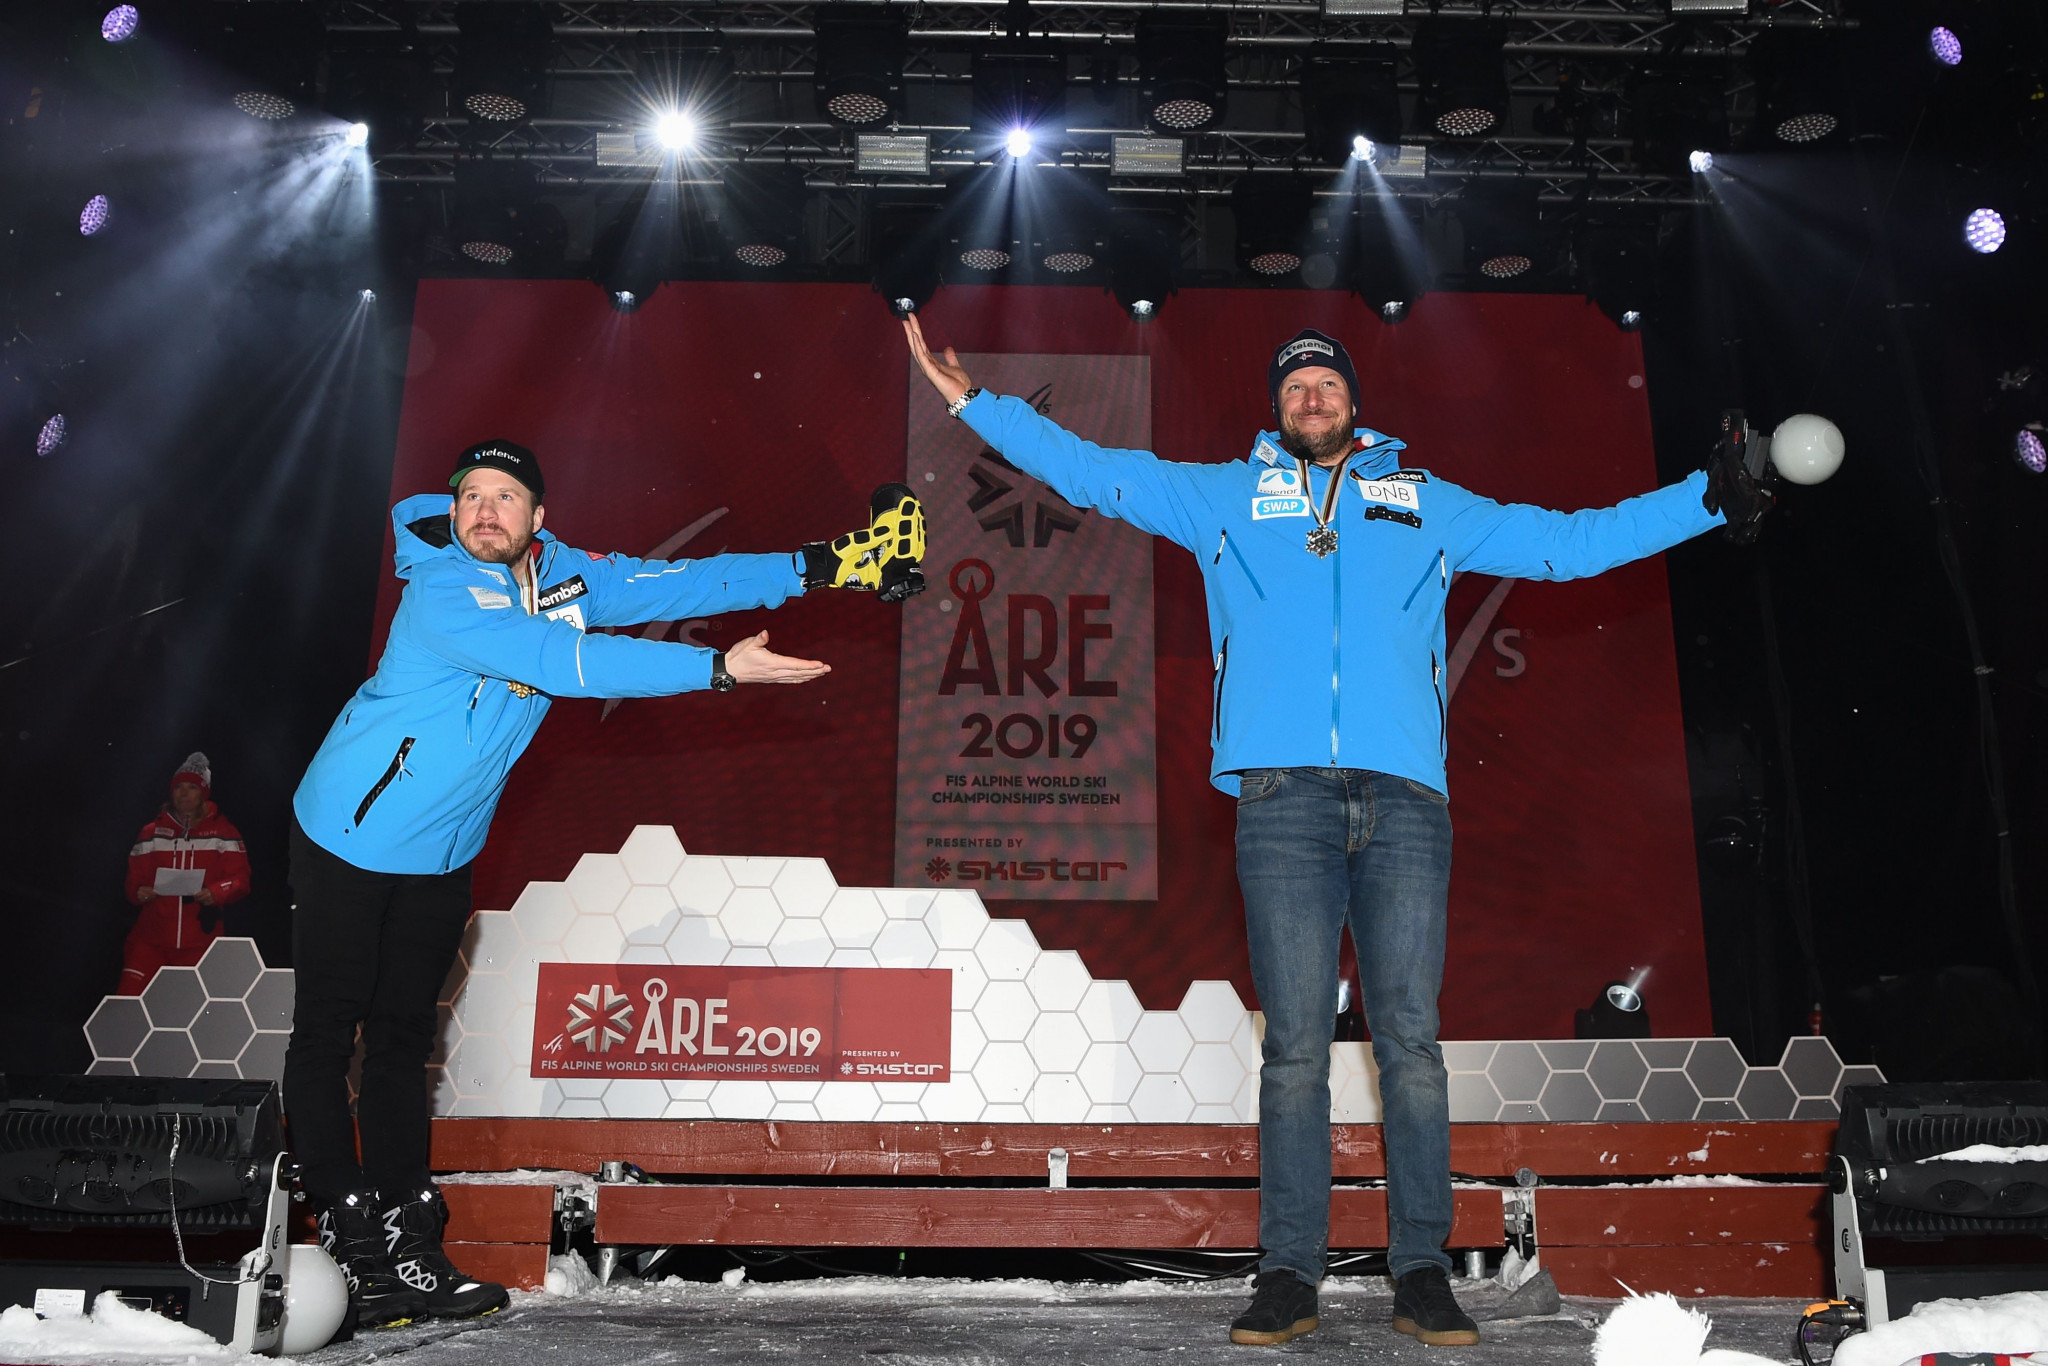 Silver medallist Svindal presented the winner to the crowd at the medal ceremony ©Getty Images